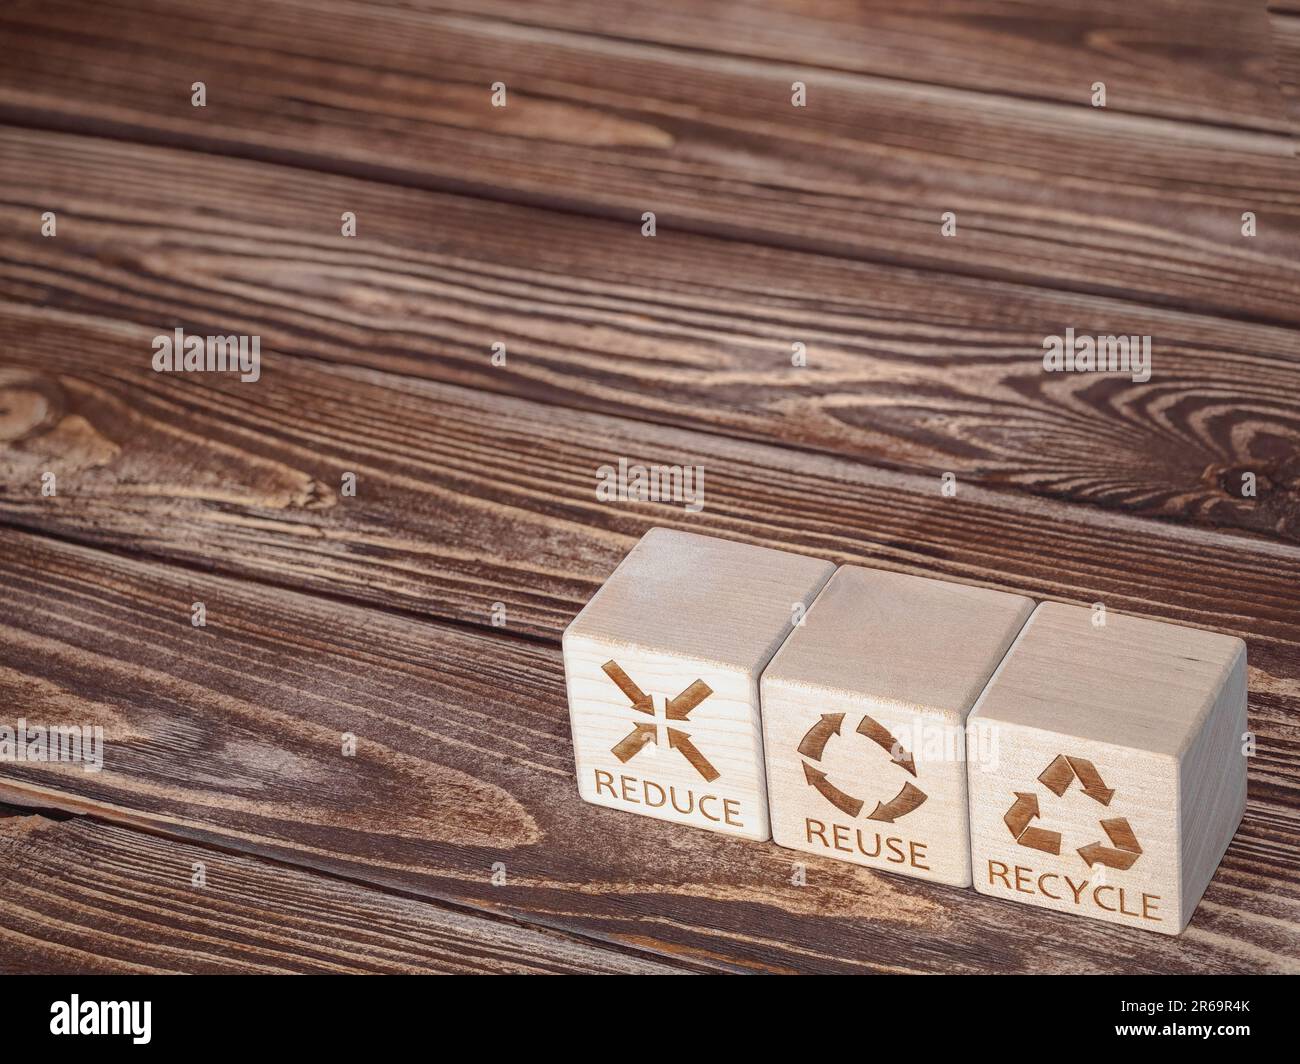 Reduce, Reuse, and Recycle symbols as a resources conservation business strategy Stock Photo